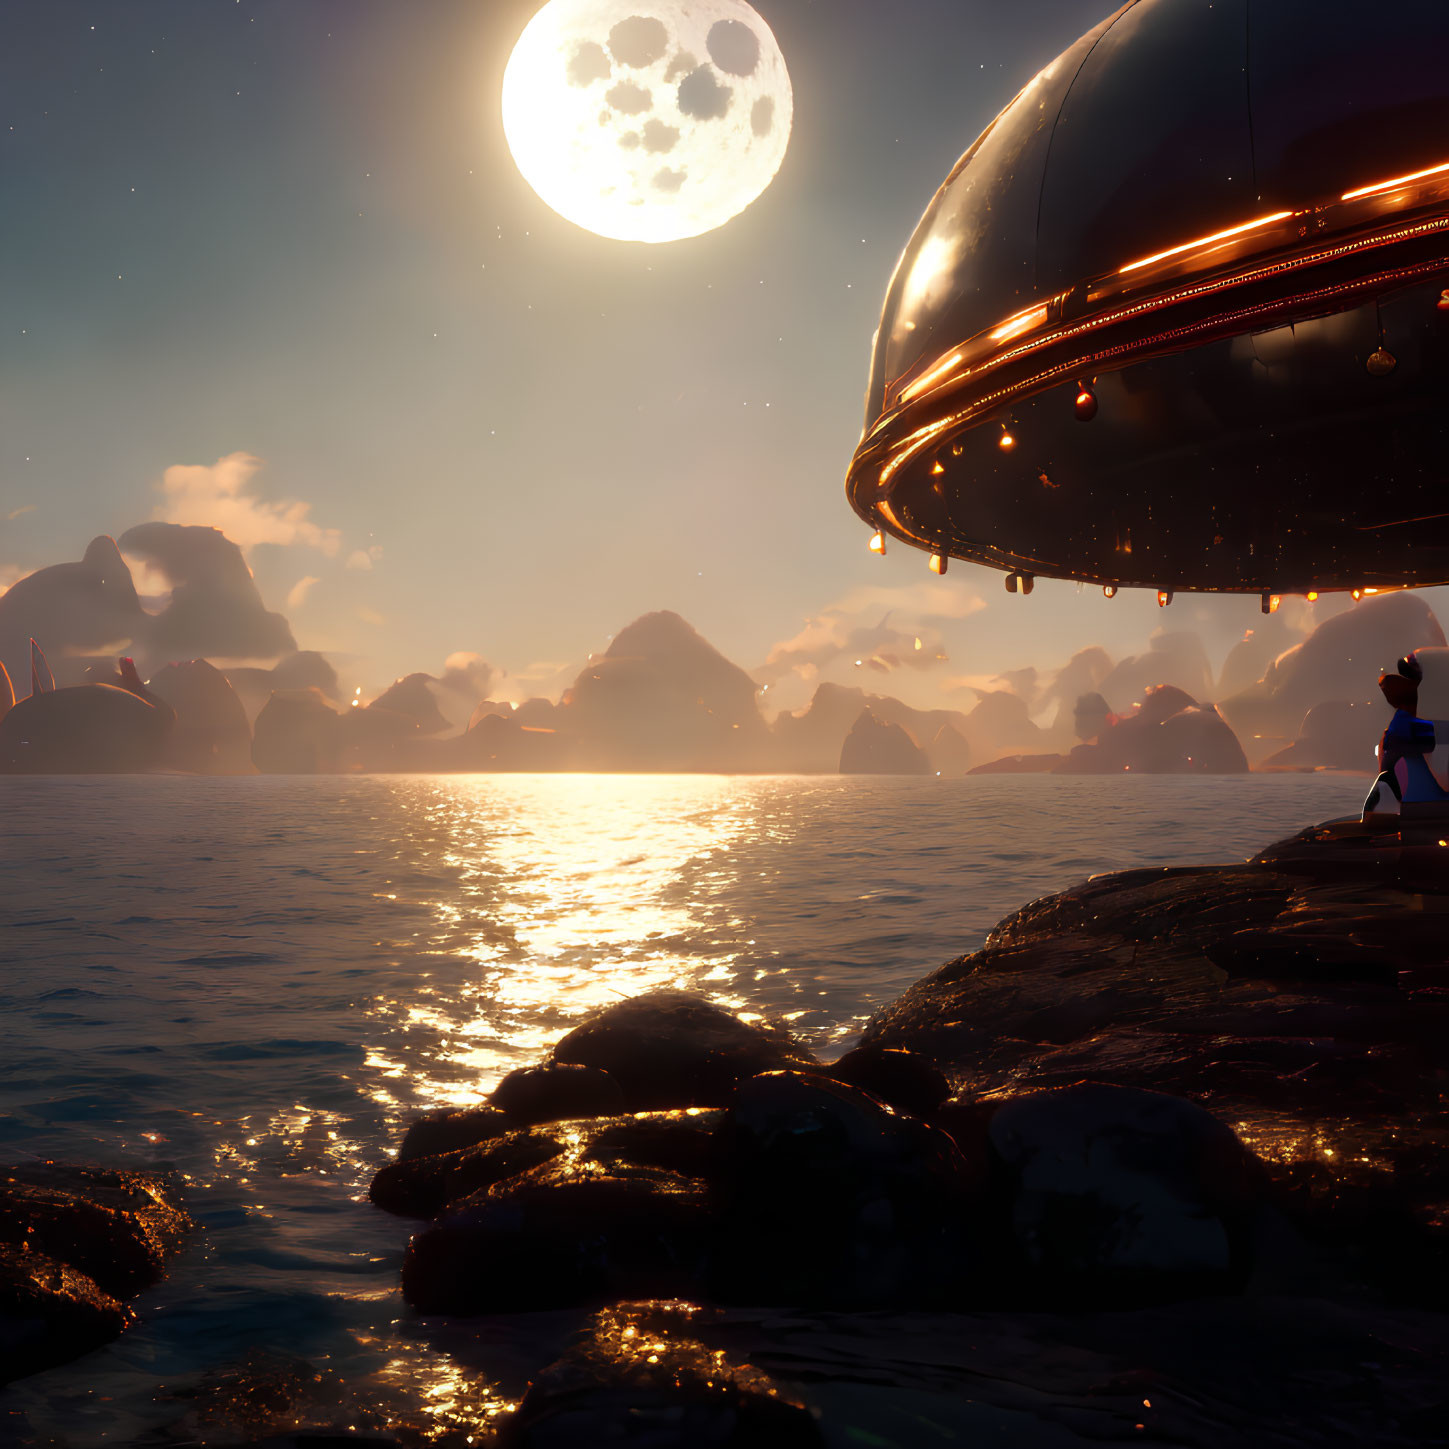 Person on rocky shore views futuristic airship at sunset